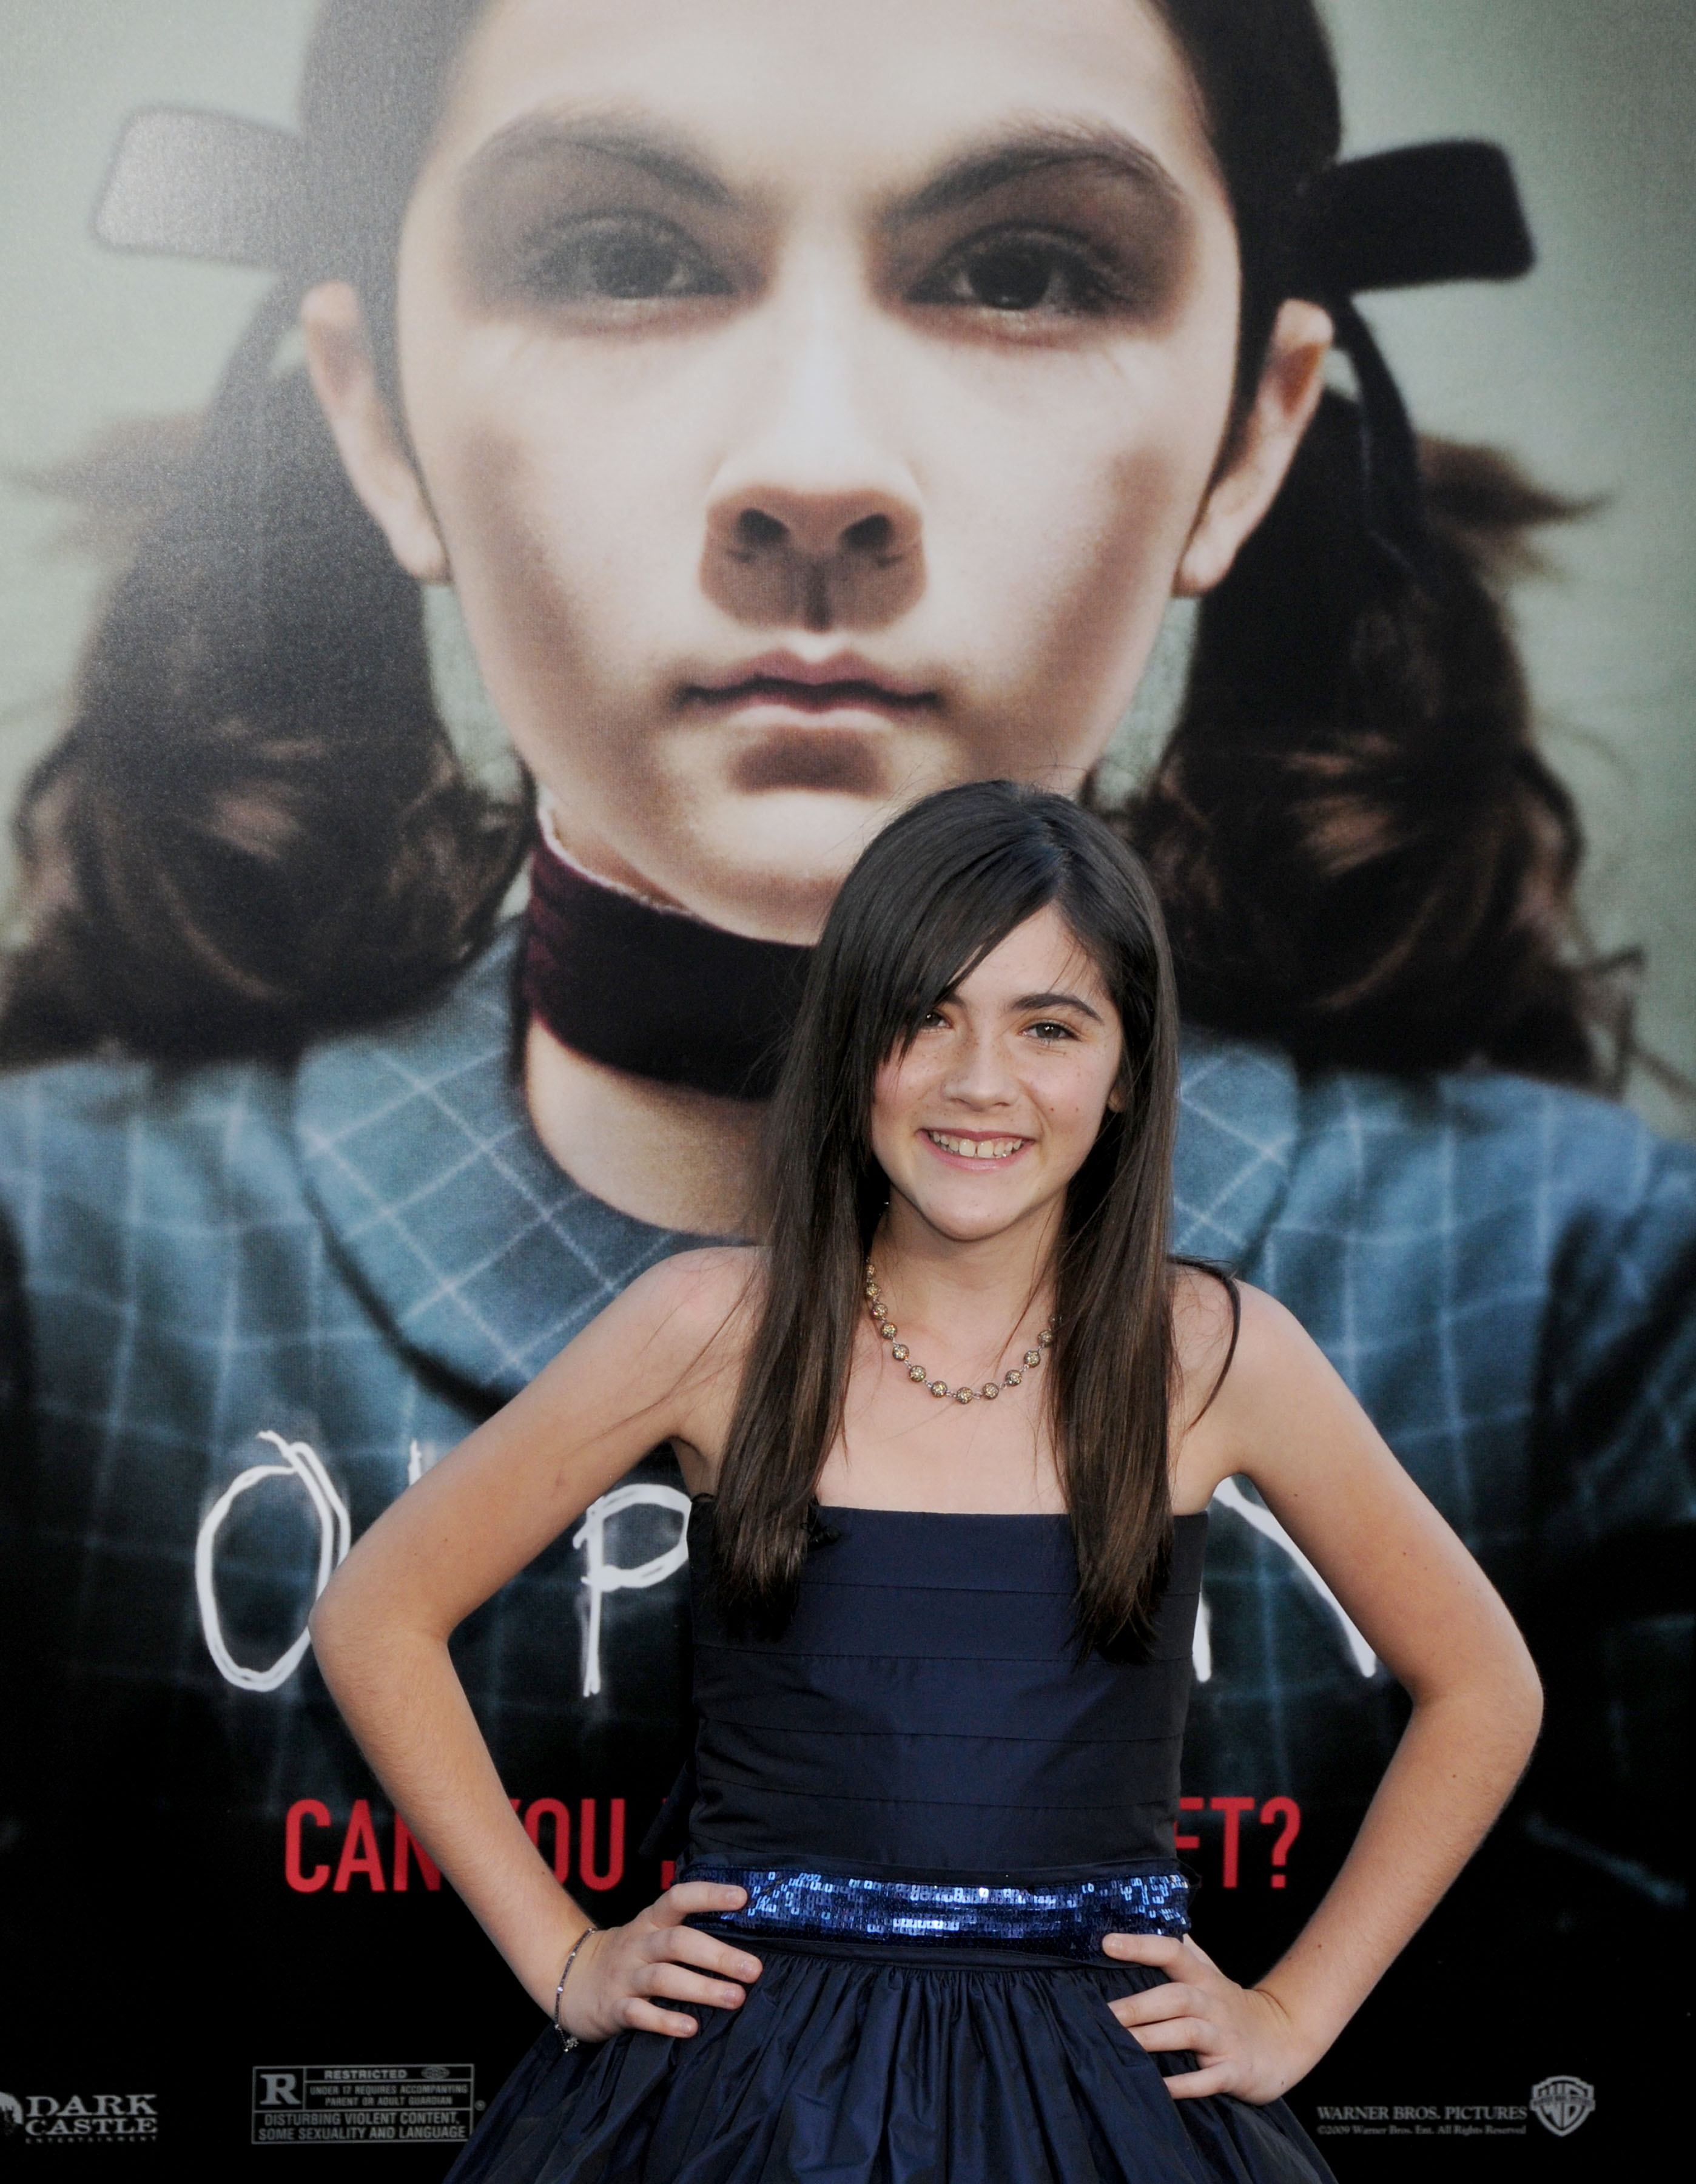 Isabelle Fuhrman stands in front of an Orphan poster